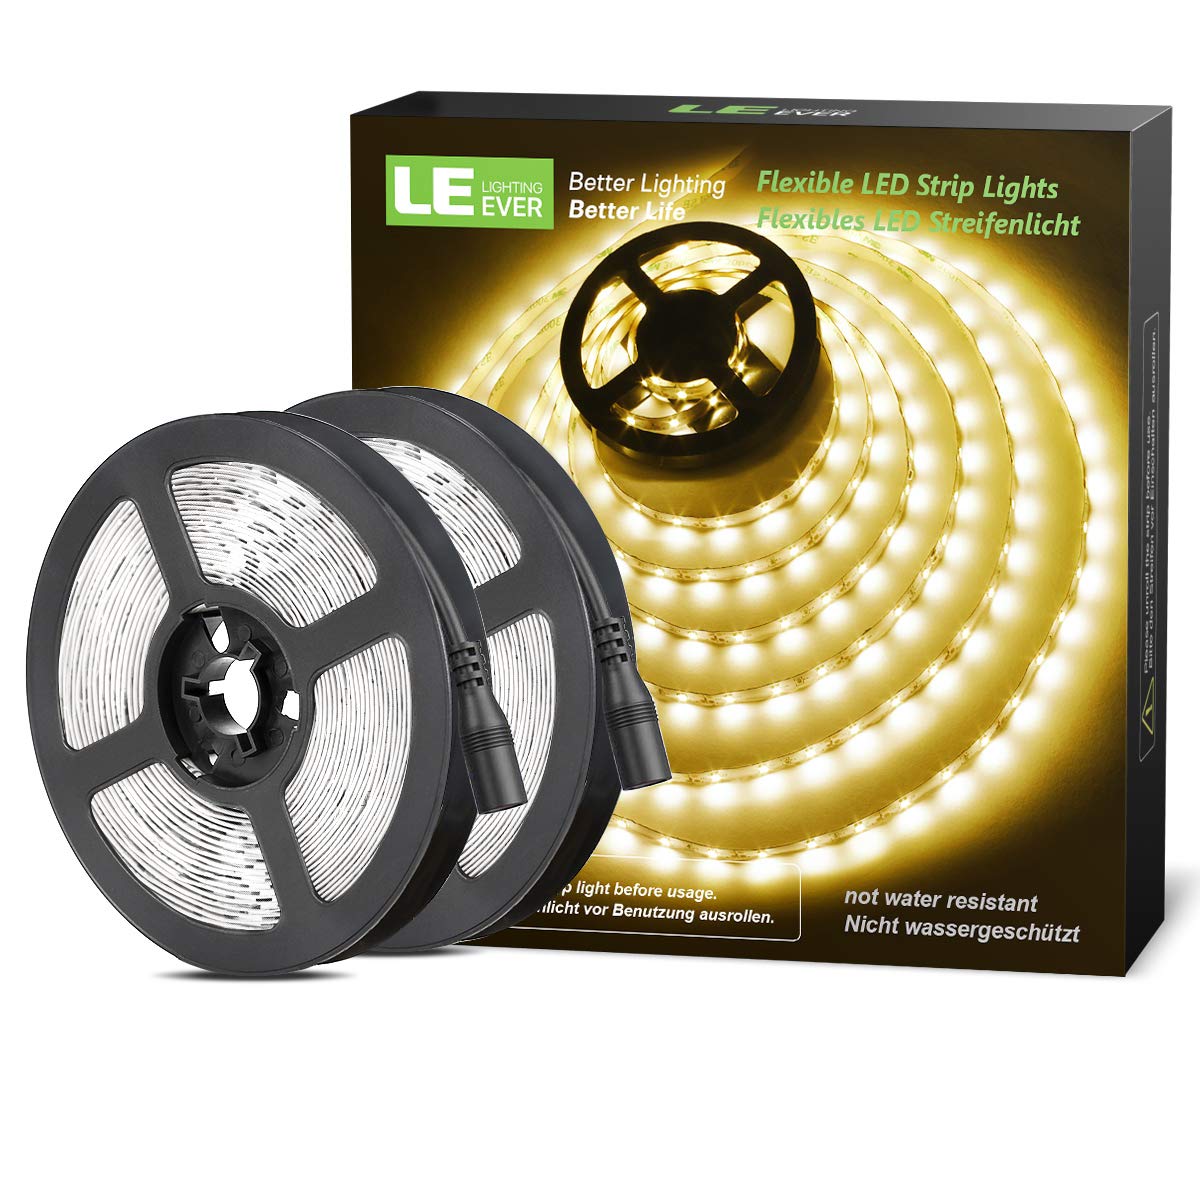 Lepro Warm White LED Strip Lights 10M (2x5M), 2400lm Flexible Lightstrip for Kitchen Cabinet Mirror Door and More (12V Power Supply Required)